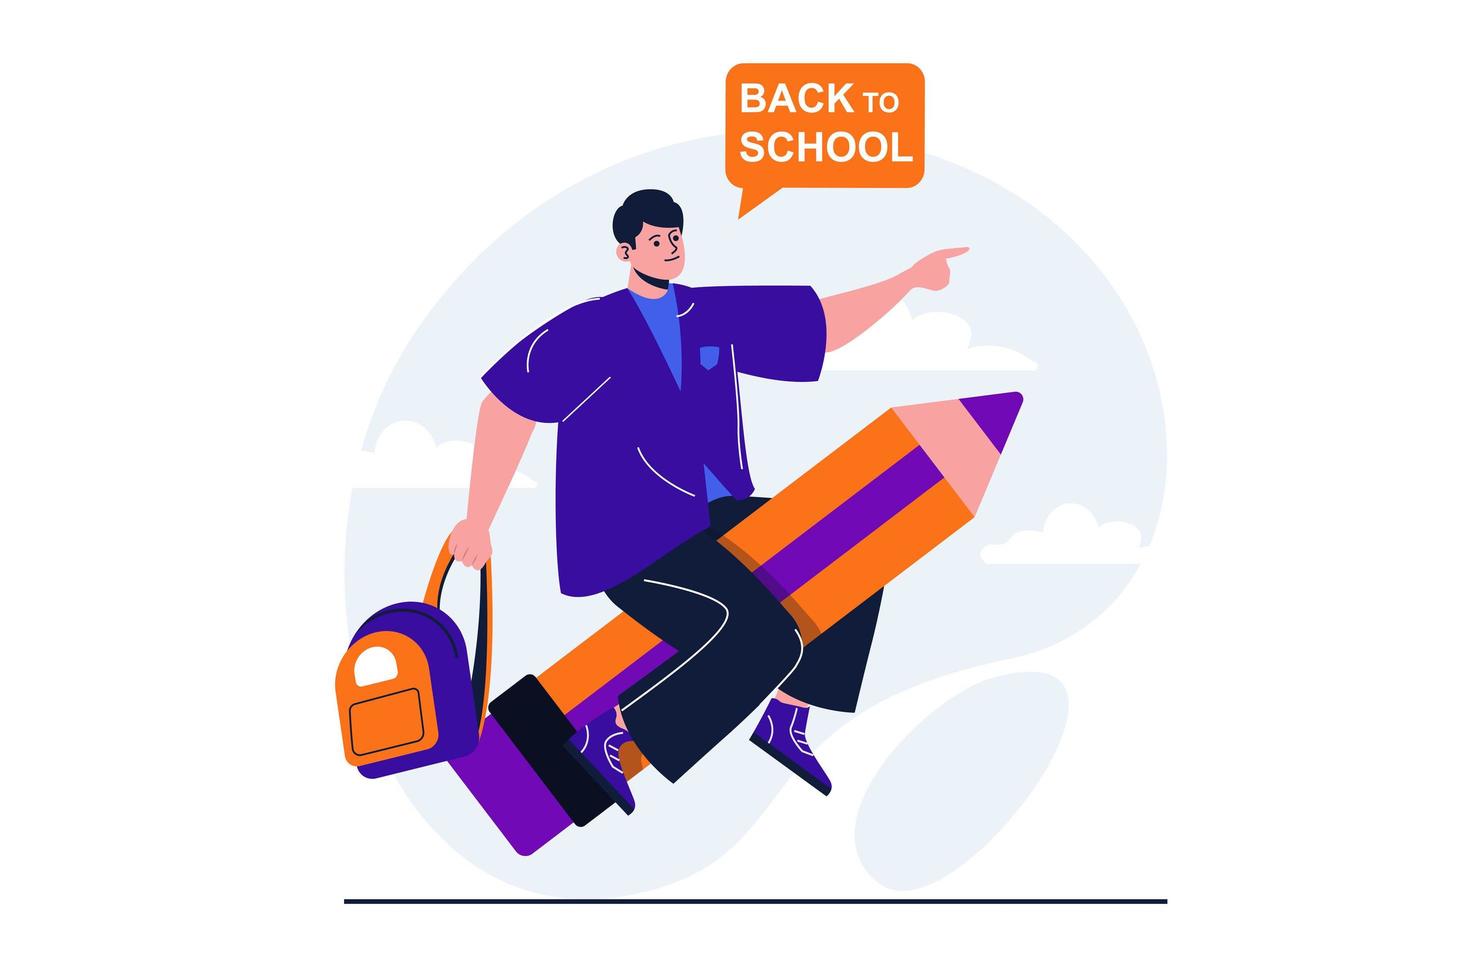 Back to school modern flat concept for web banner design. Happy teenager student with backpack flying on huge pencil and hurries to college for lessons. Vector illustration with isolated people scene